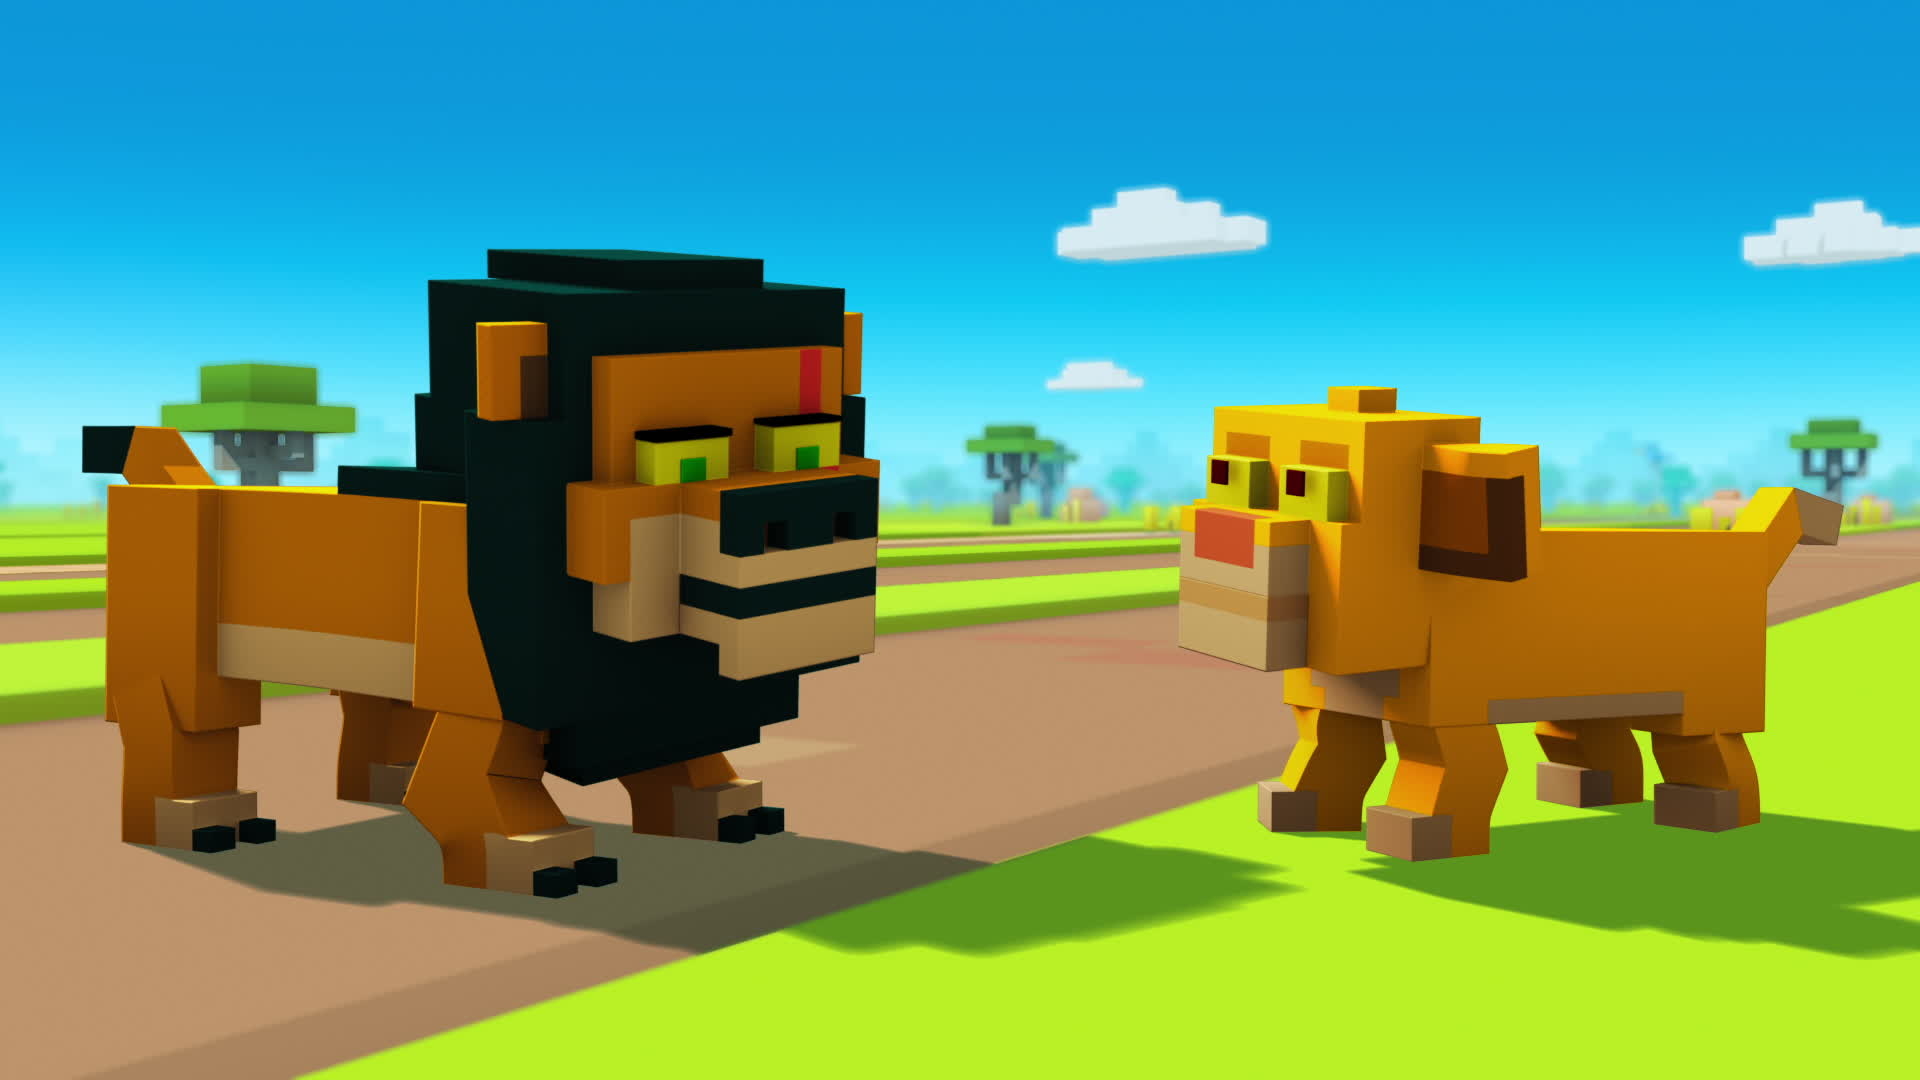 on disney crossy road what do i do in lion king level to earn hidden characters